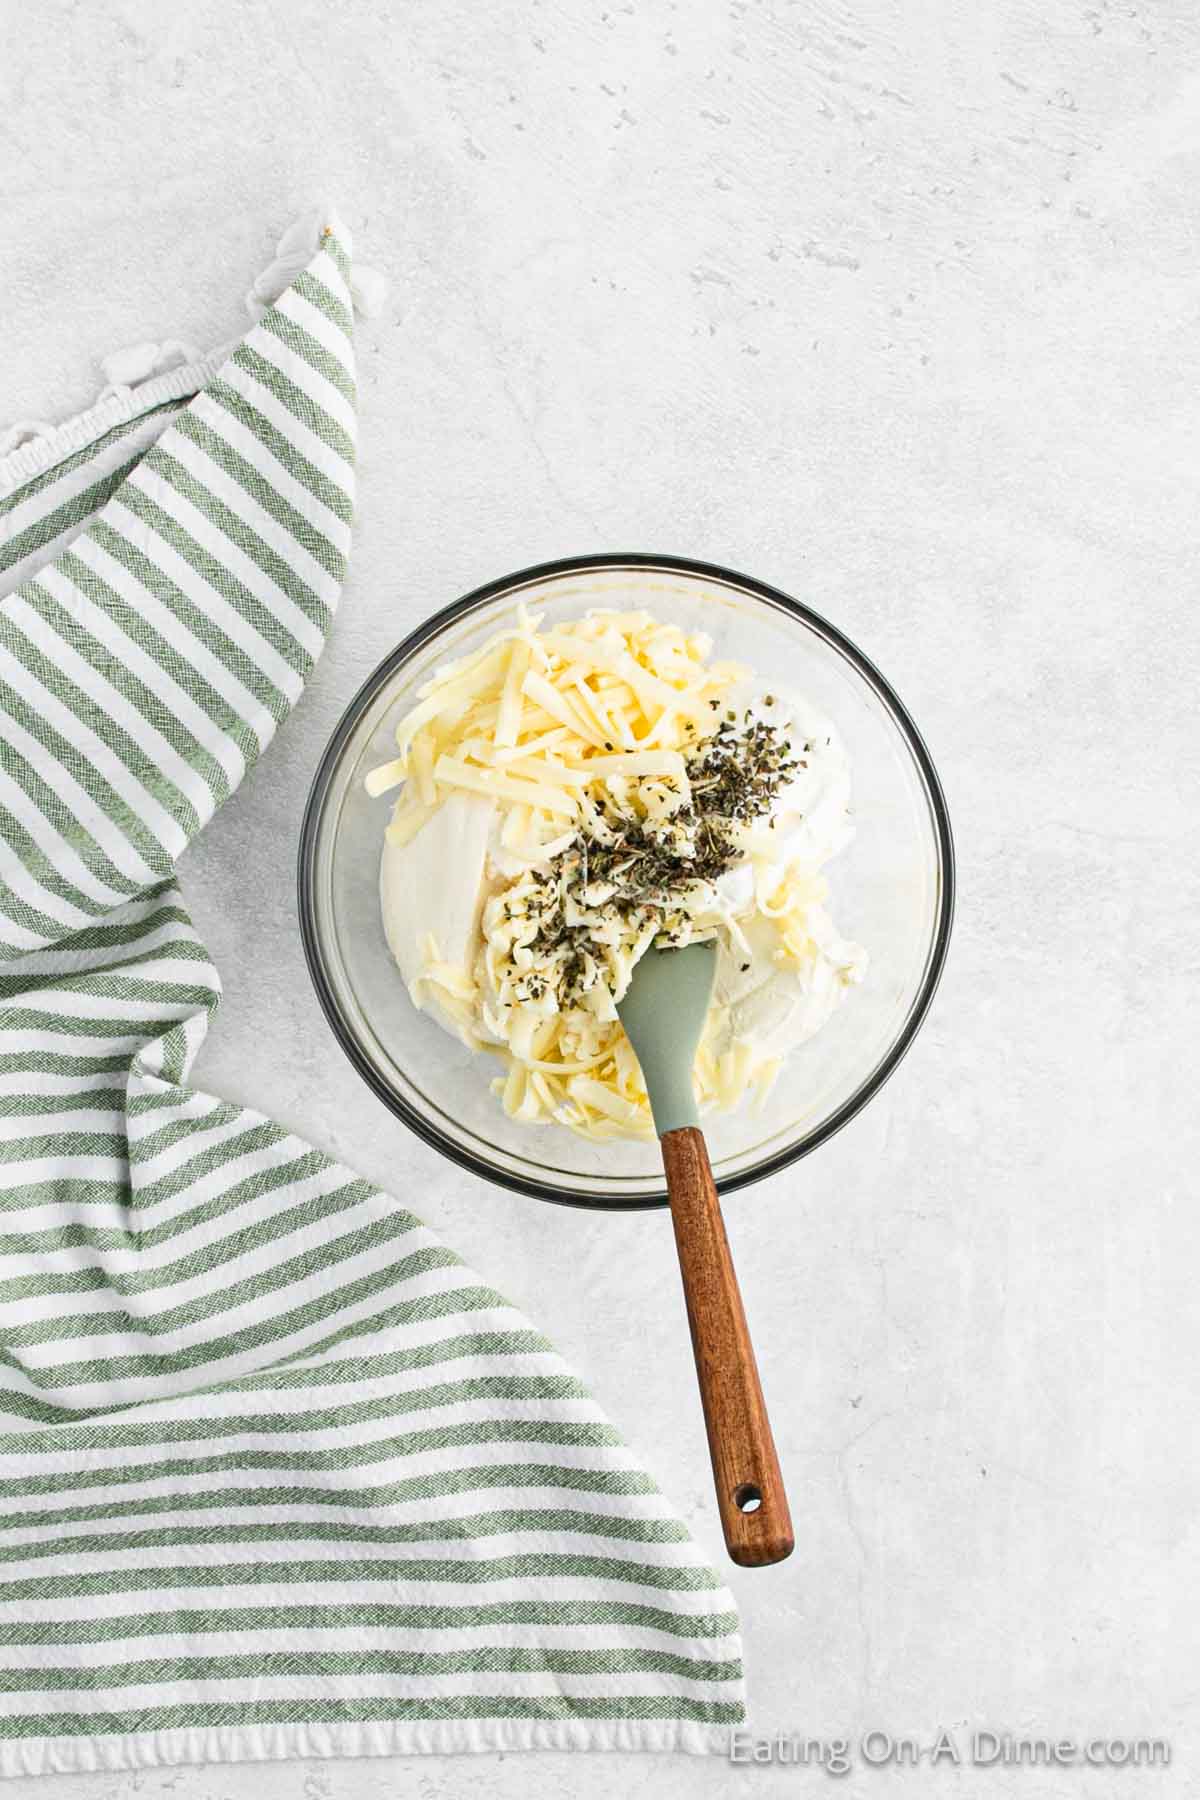 A glass bowl filled with shredded cheese, mayonnaise, and seasoning is being mixed with a green spatula. The bowl is placed on a light-colored surface next to a green and white striped cloth, reminiscent of the million dollar spaghetti recipe's rich ingredients.